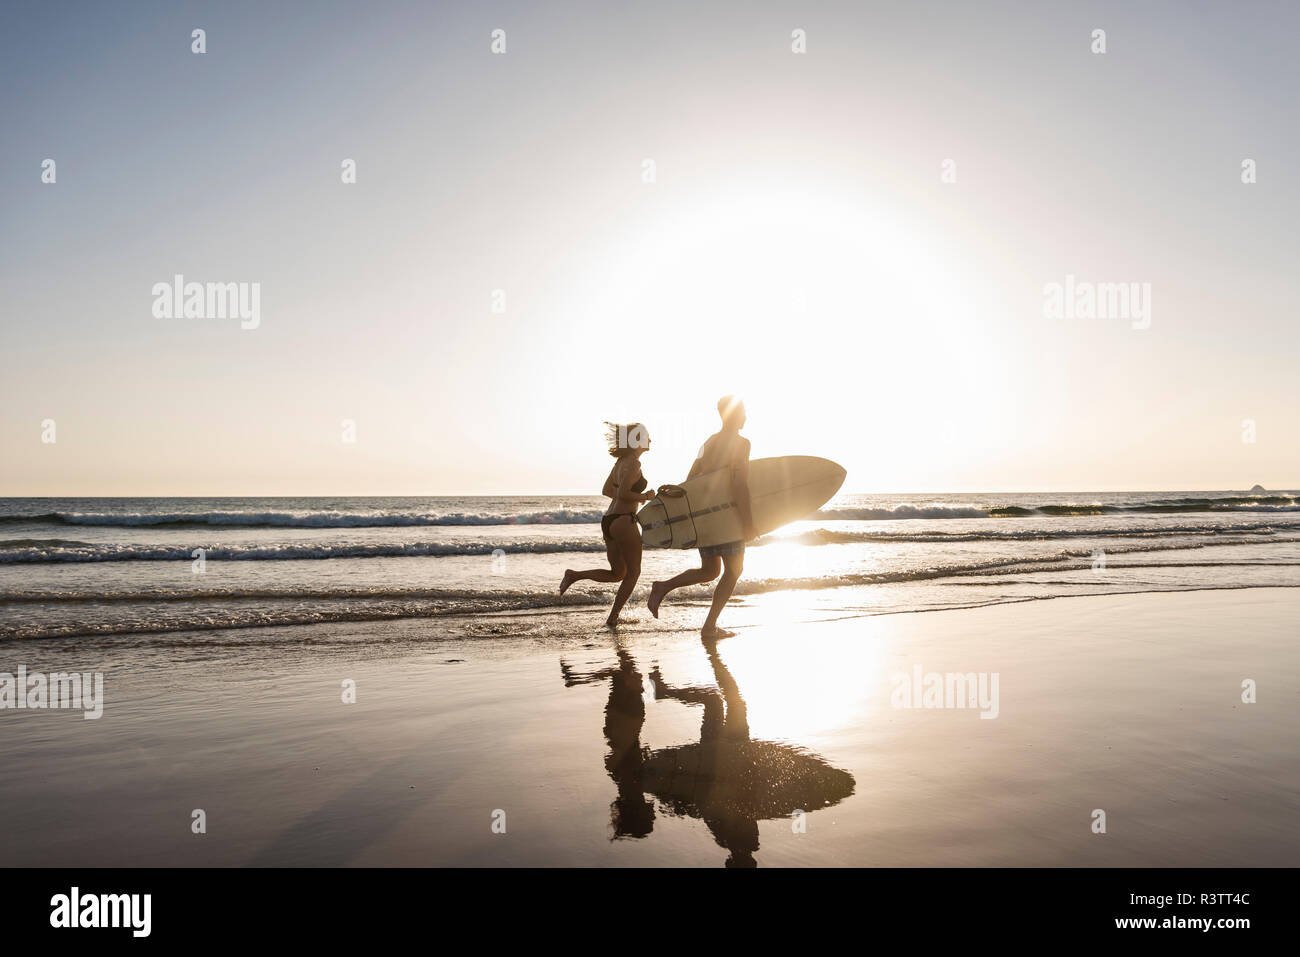 Young couple running on beach, carrying surfboard Stock Photo